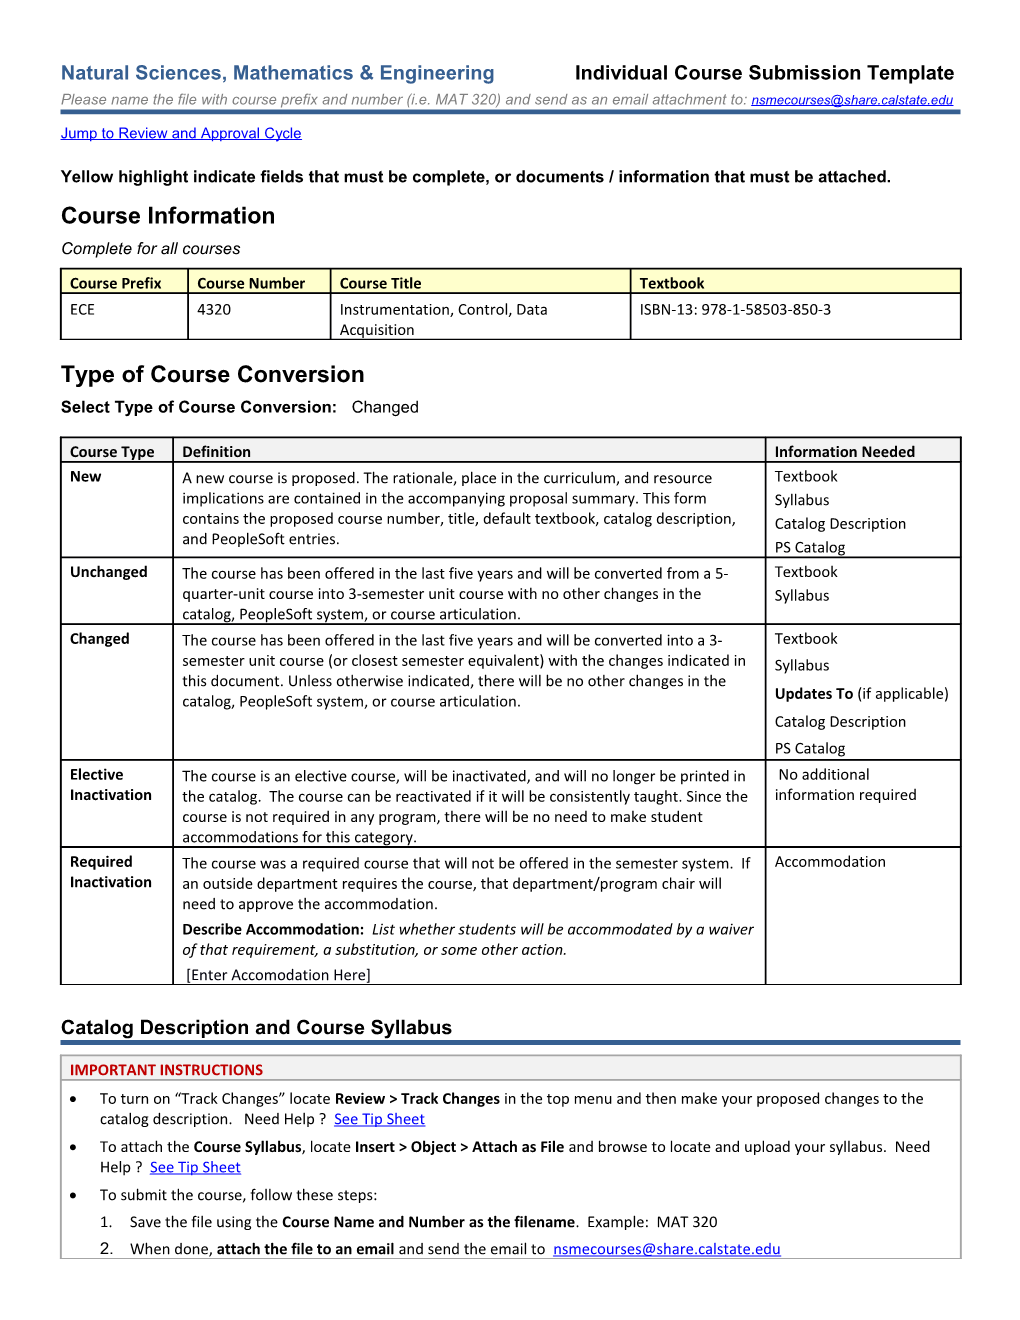 Natural Sciences, Mathematics & Engineering Individual Course Submission Template s1